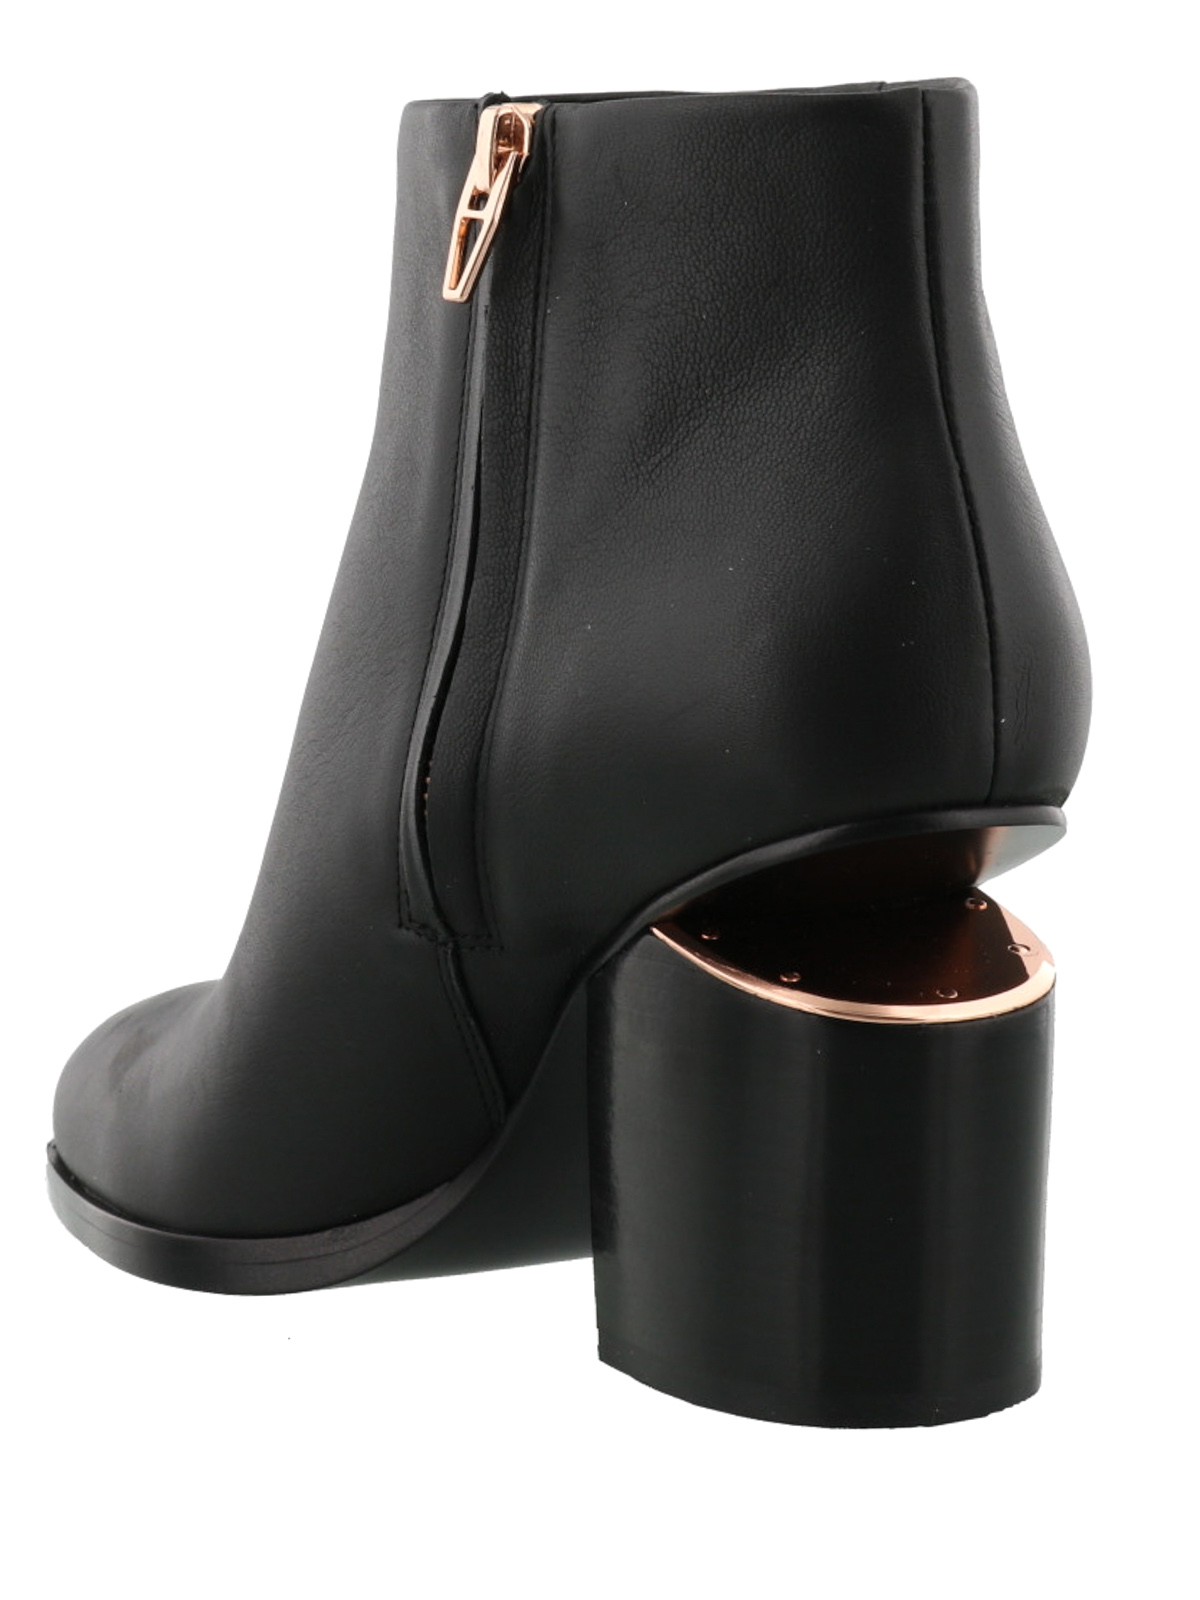 Gabi rose gold detailed ankle boots 